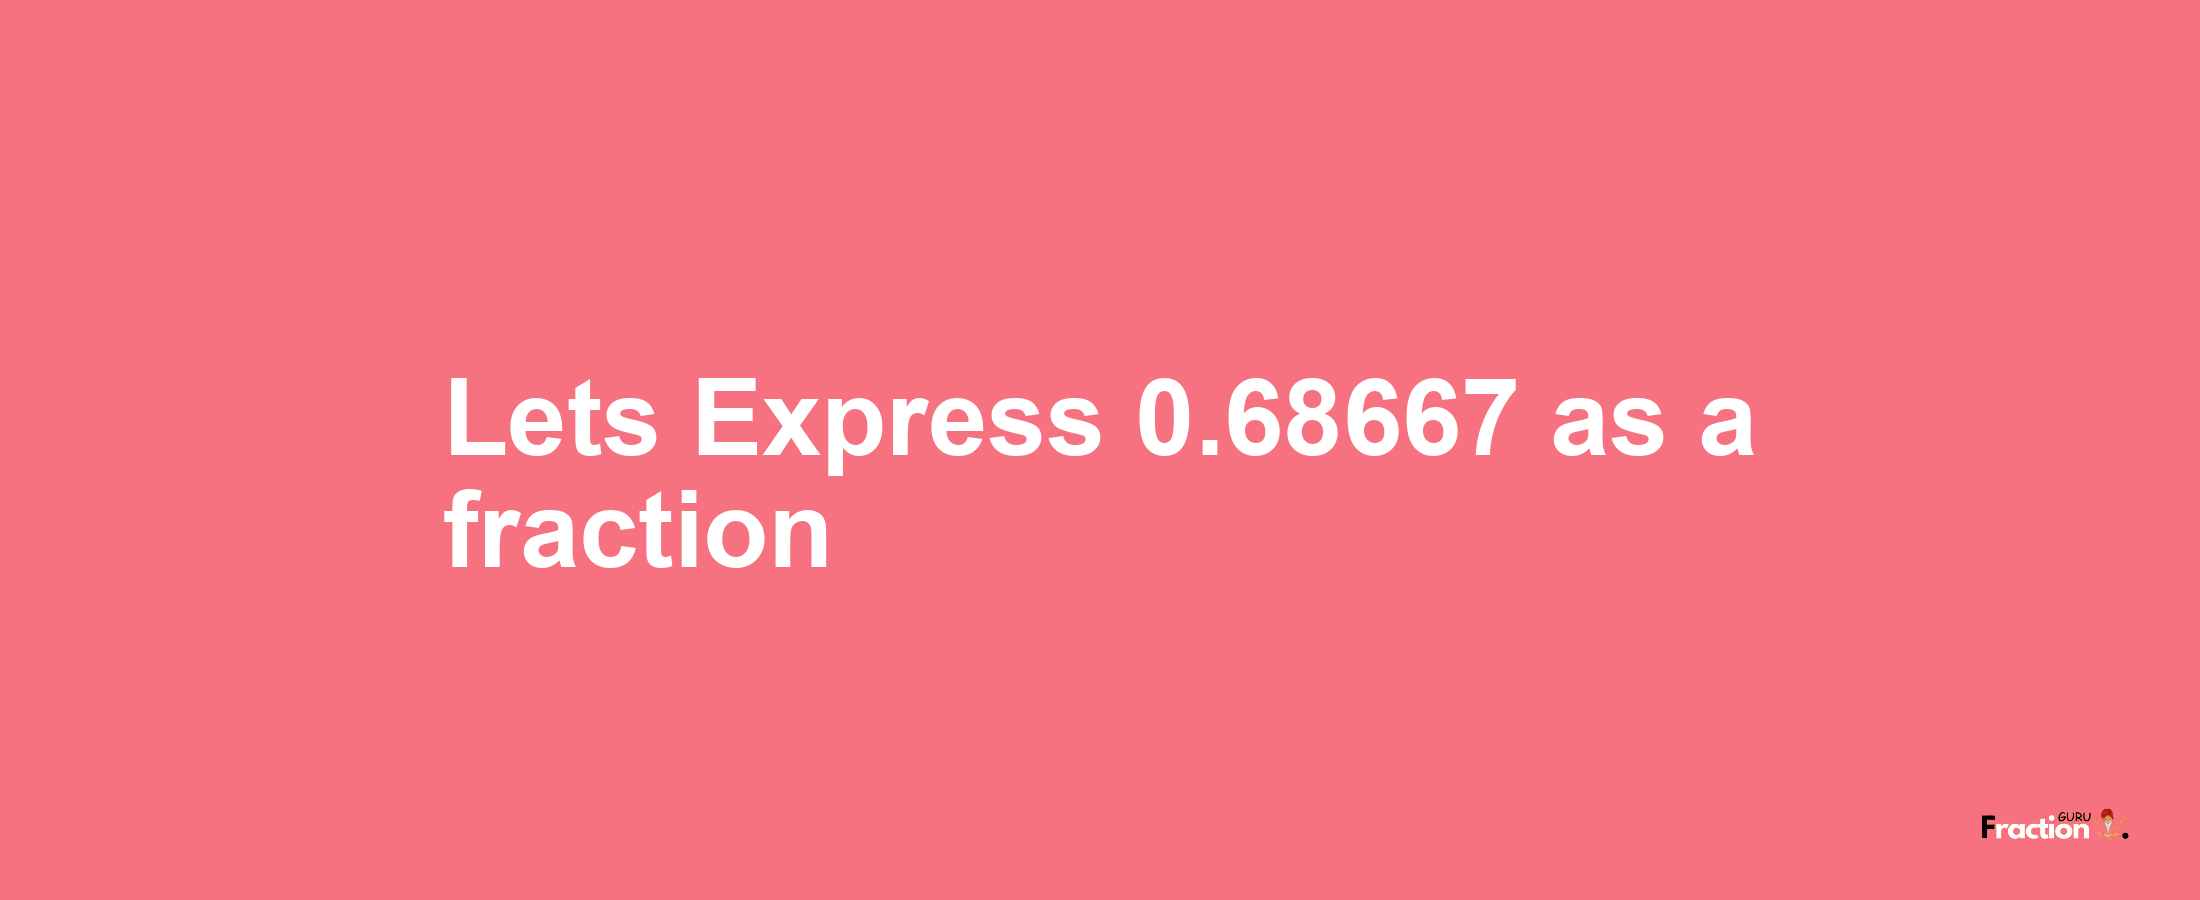 Lets Express 0.68667 as afraction